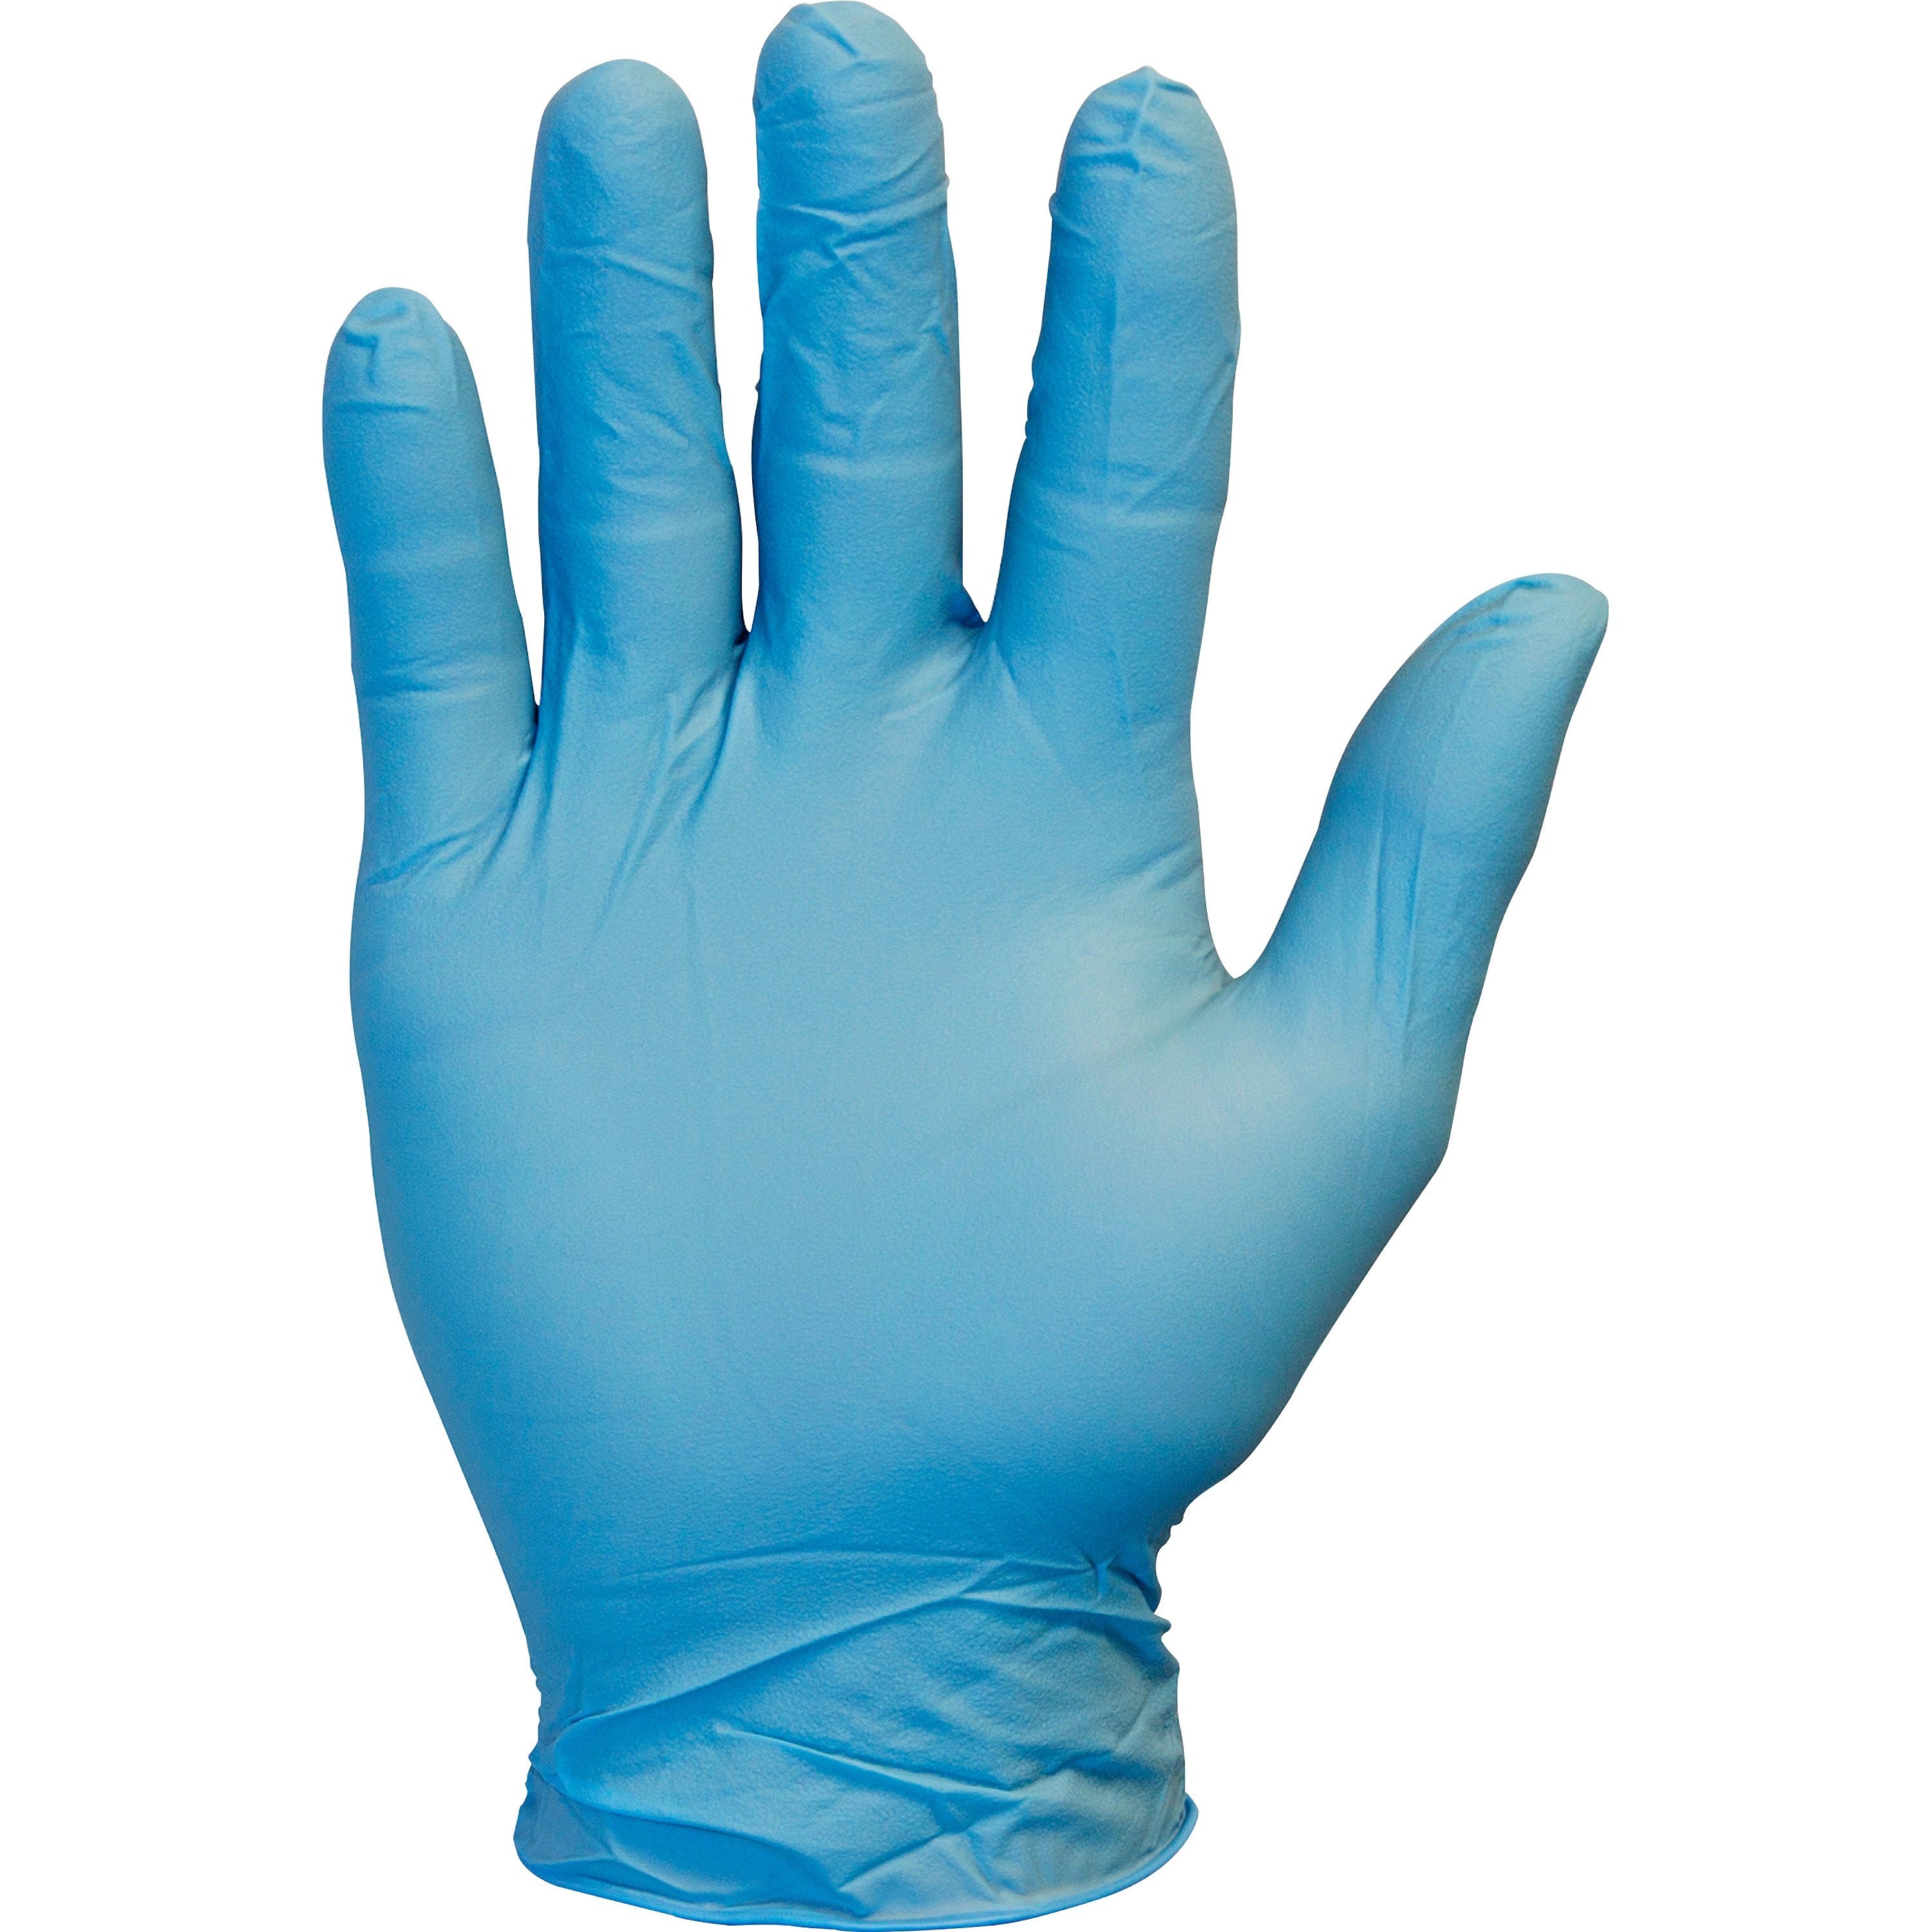 safety-zone-powder-free-blue-nitrile-gloves-large-size-blue-comfortable-allergen-free-silicone-free-latex-free-for-cleaning-dishwashing-food-janitorial-use-painting-pet-care-10-carton-965-glove-length_szngnprlg1mct - 1